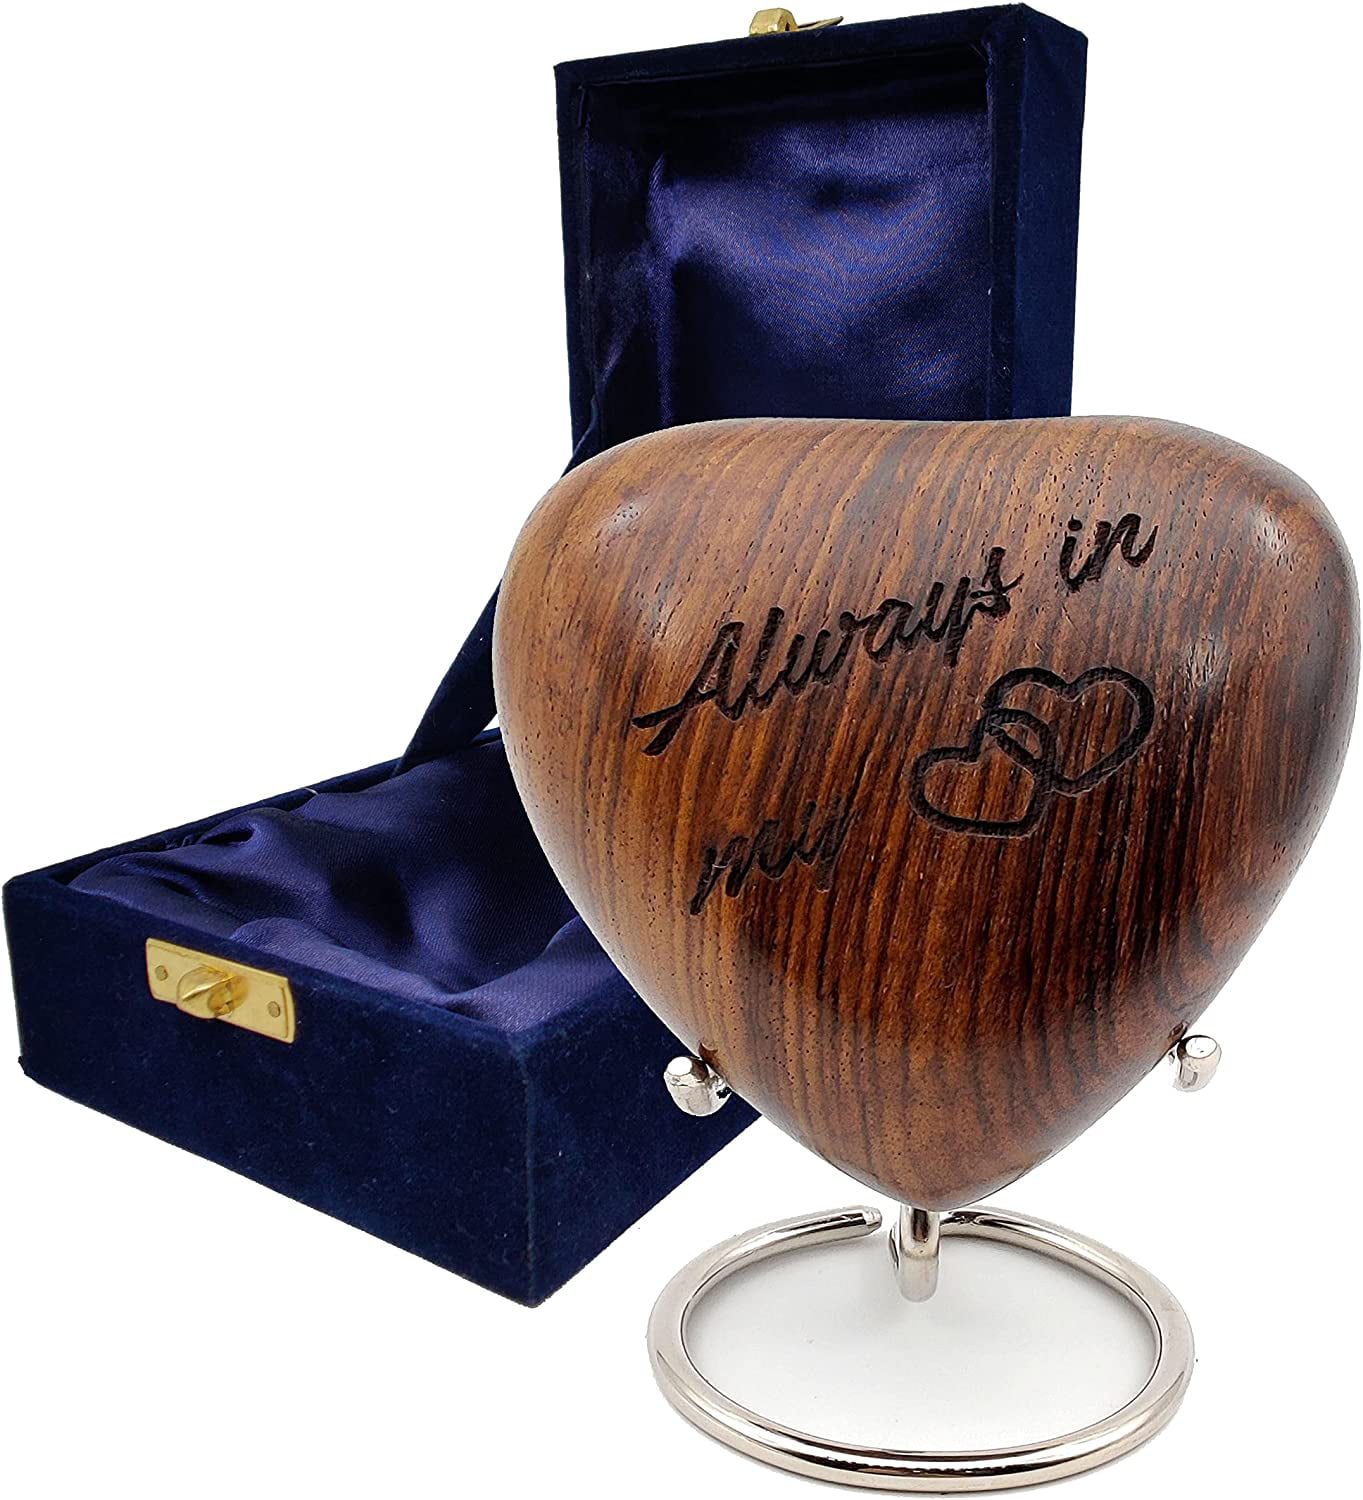 Mini Cremation Urn For Ashes Funeral Memorial Small Red Heart Keepsake & box 